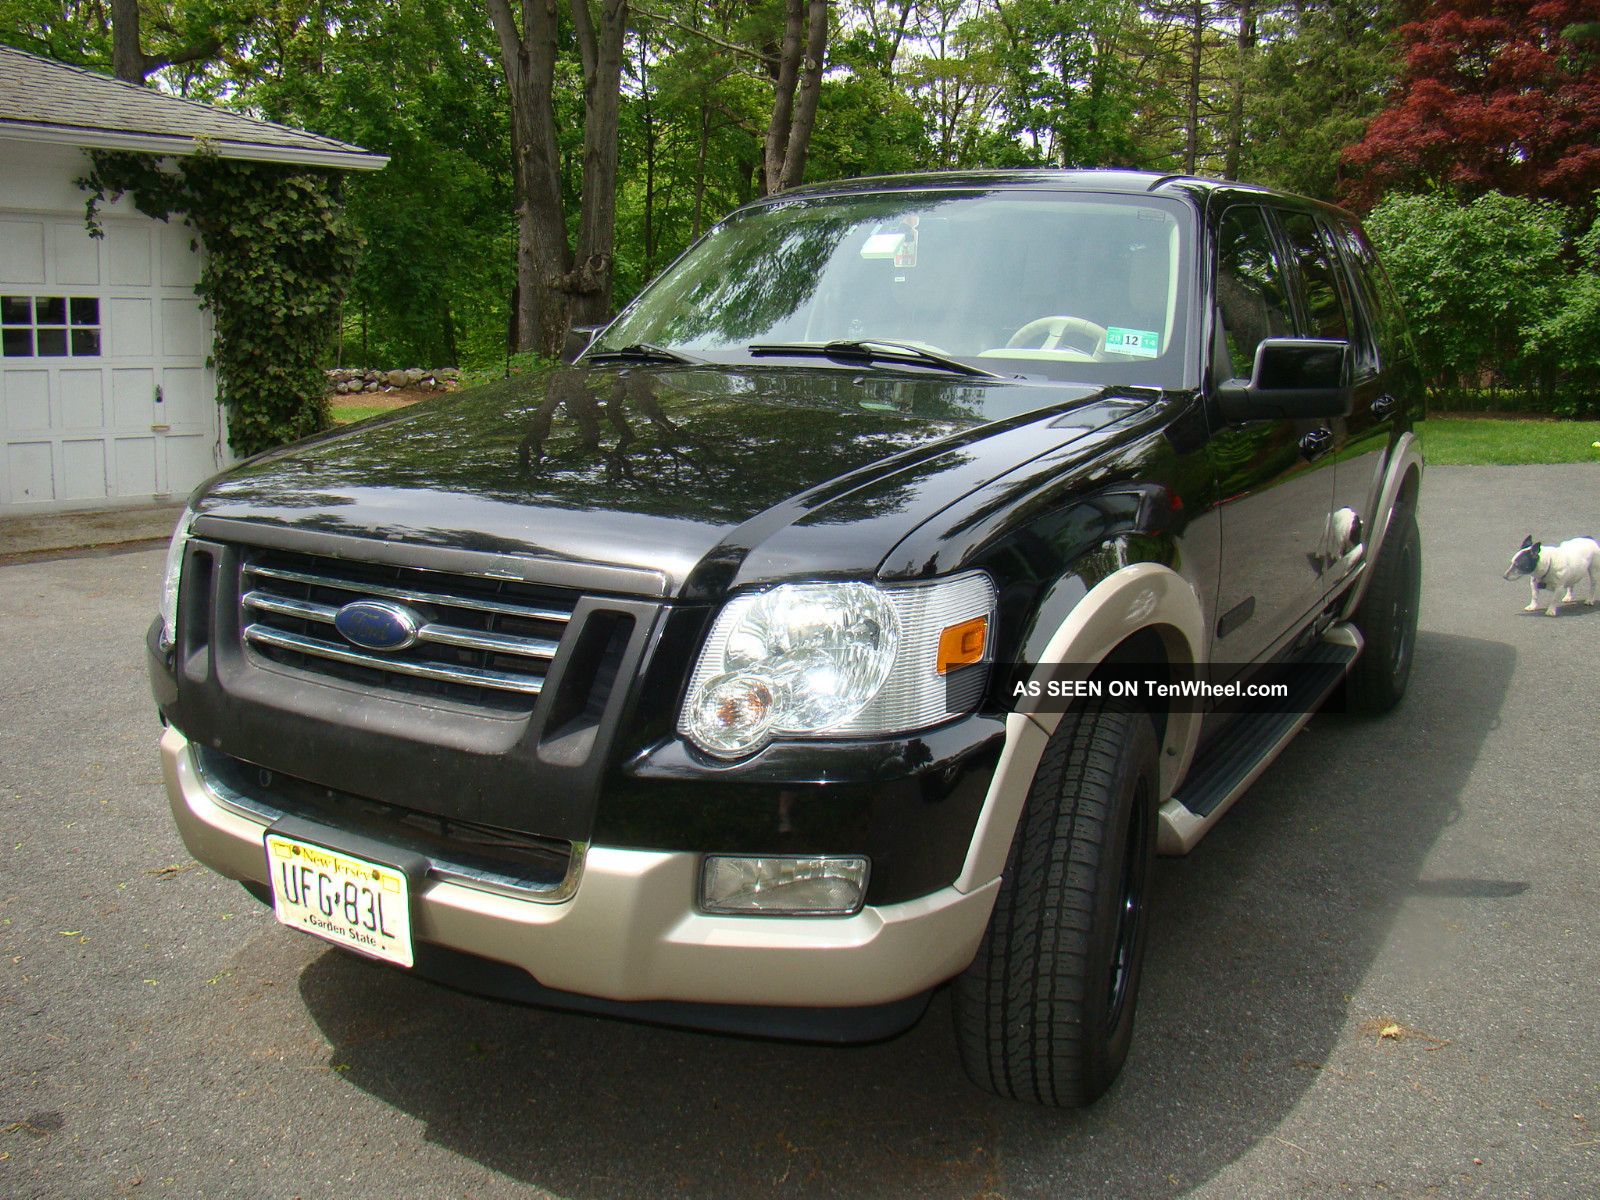 2000 Ford explorer eddie bauer edition owners manual